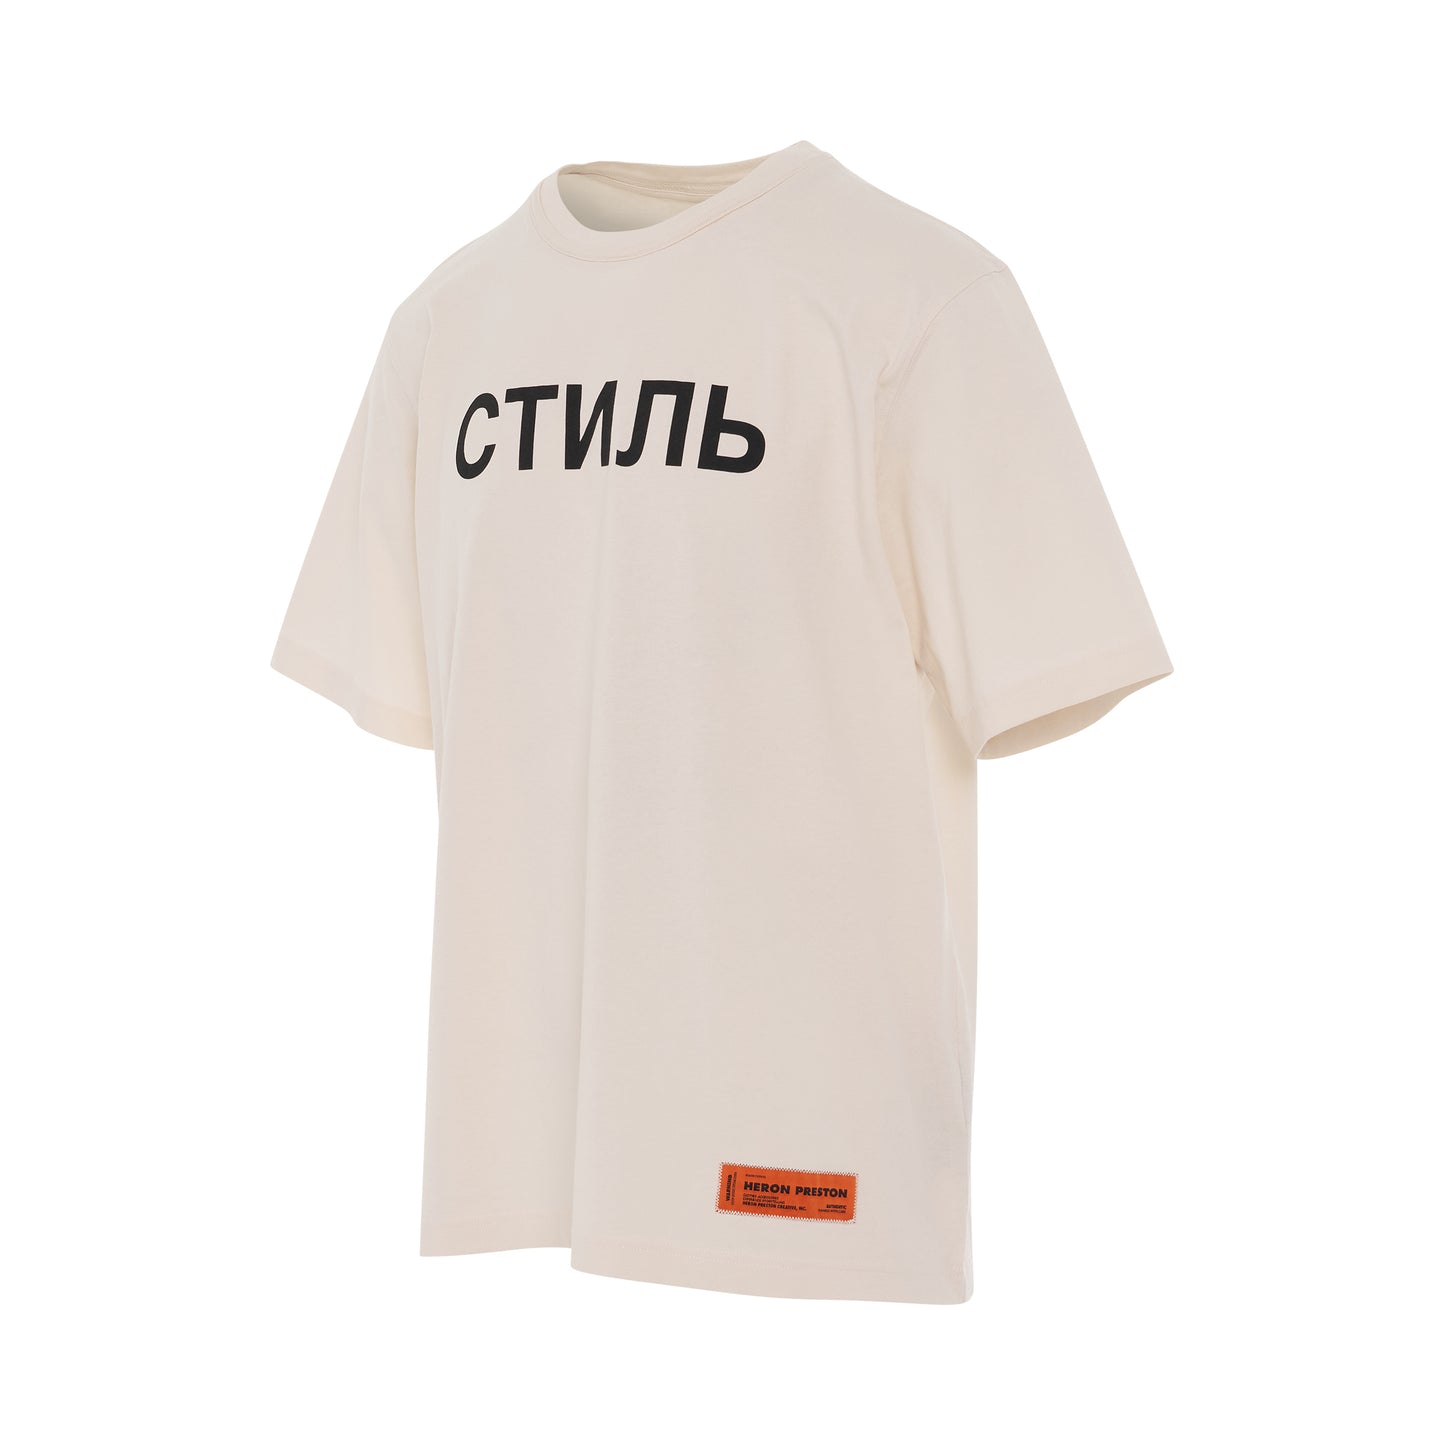 CTNMB T-Shirt in Off White